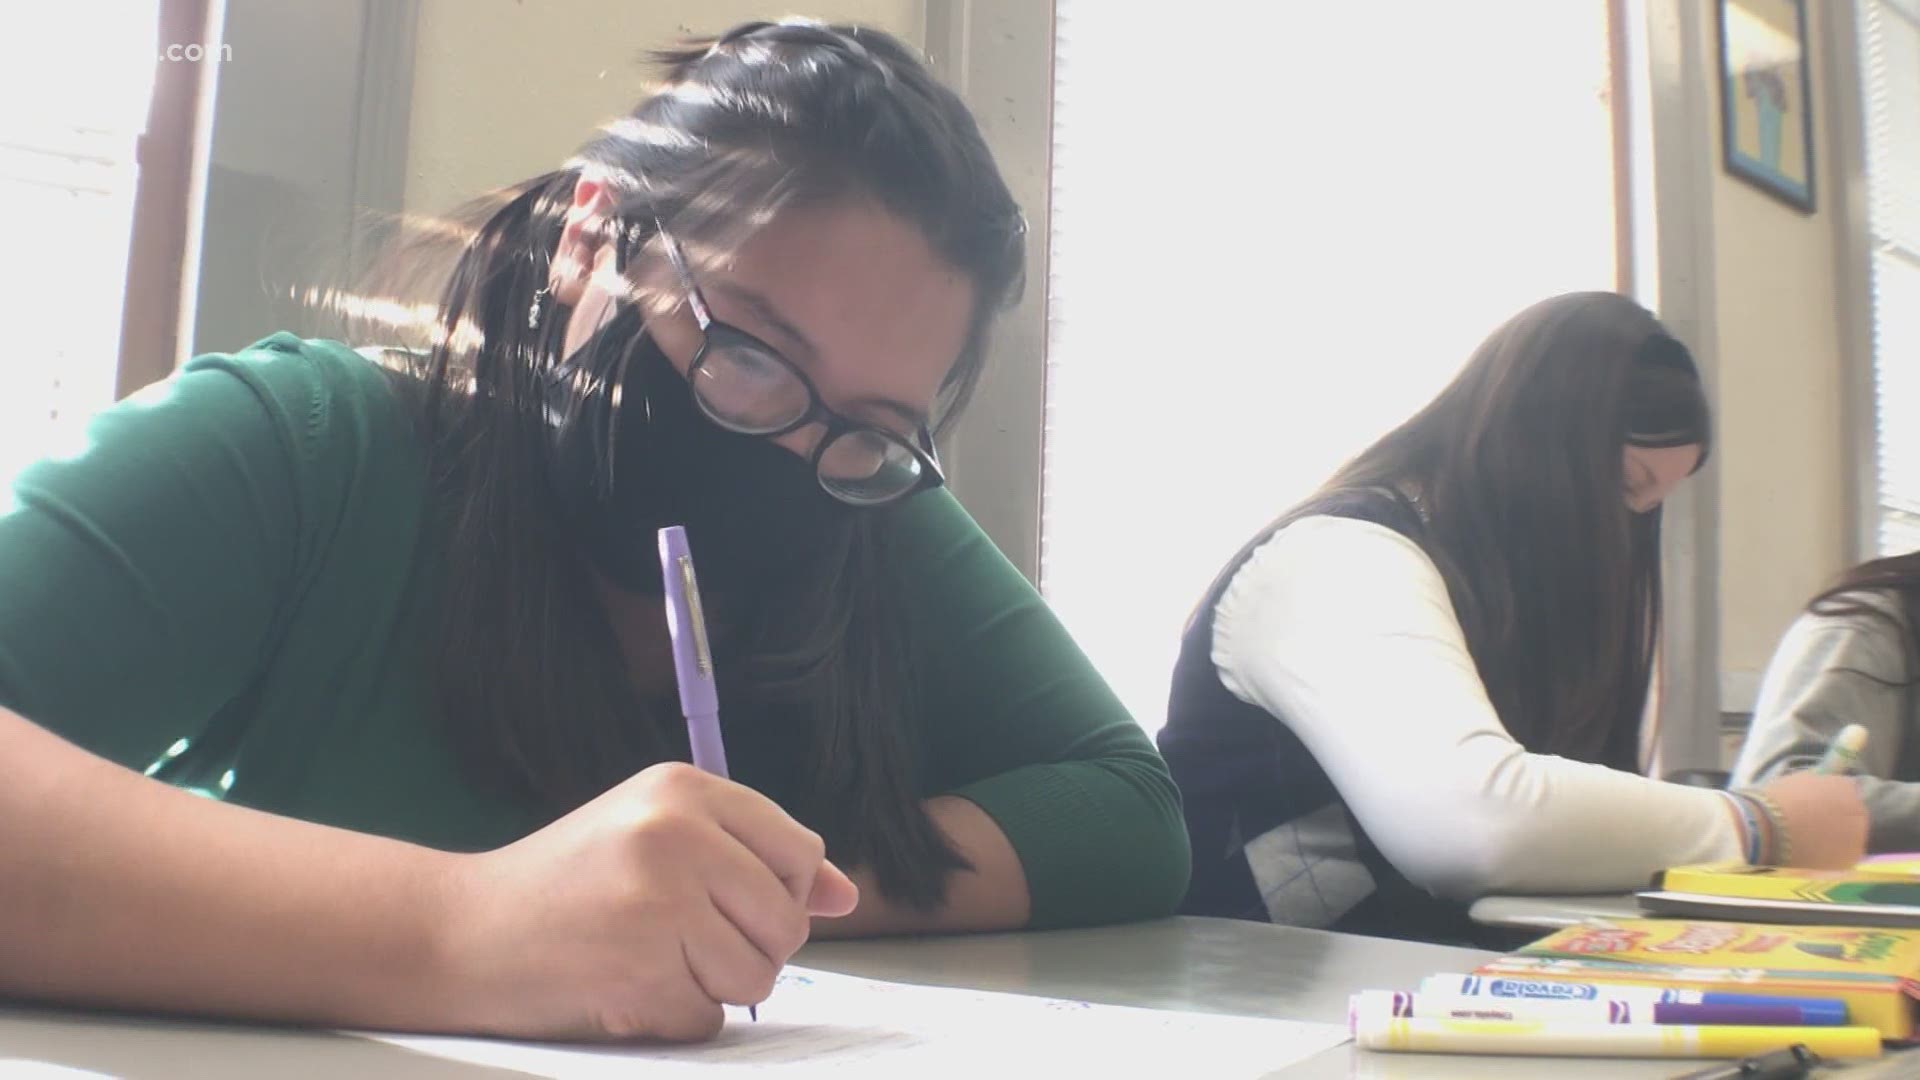 Those who visited senior centers pre-COVID are finding new ways to stay in touch. A group of teenagers in Chandler adopted a letter-writing campaign to stay in touch